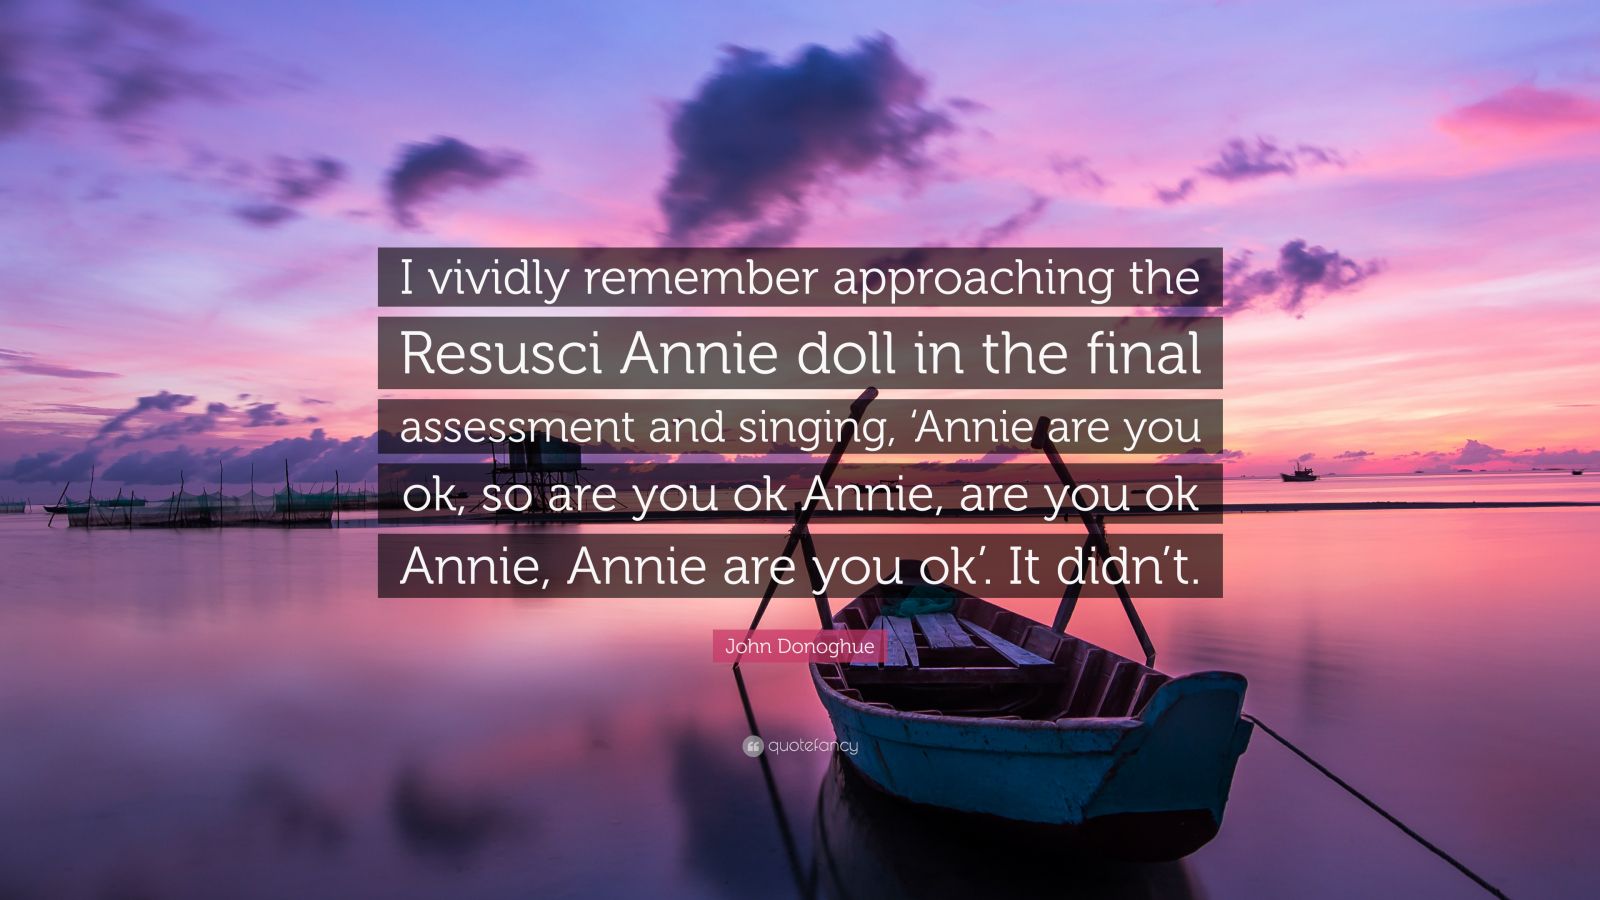 John Donoghue Quote: “I vividly remember approaching the Resusci Annie ...